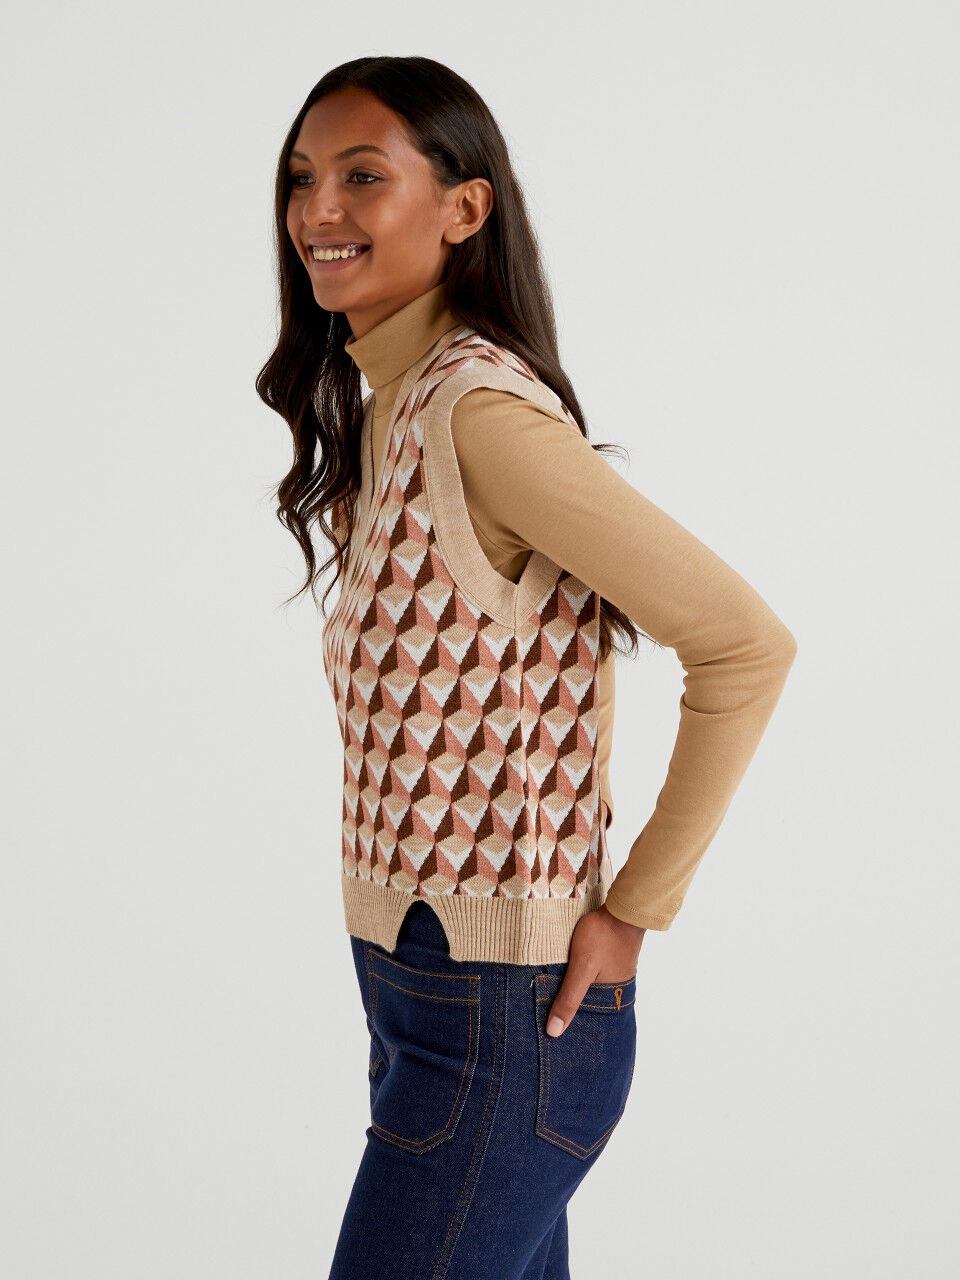 Women's Knit Vests New Collection 2022 | Benetton